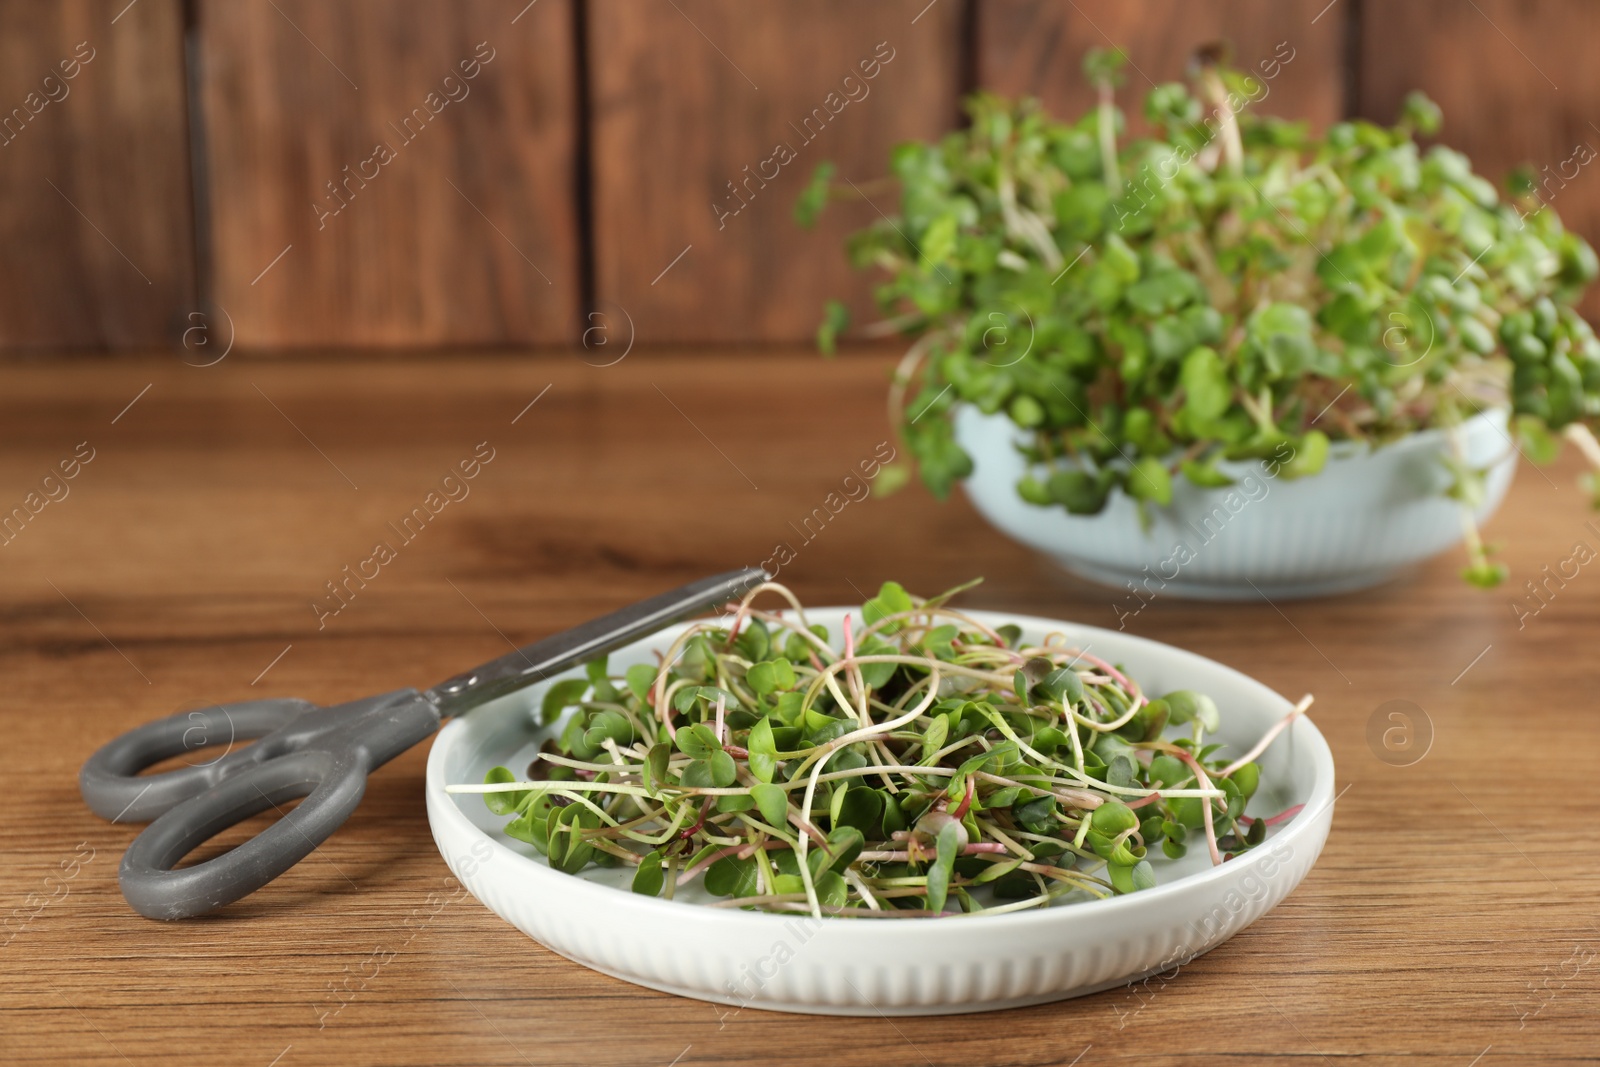 Photo of Plate with fresh radish microgreens and scissors on wooden table